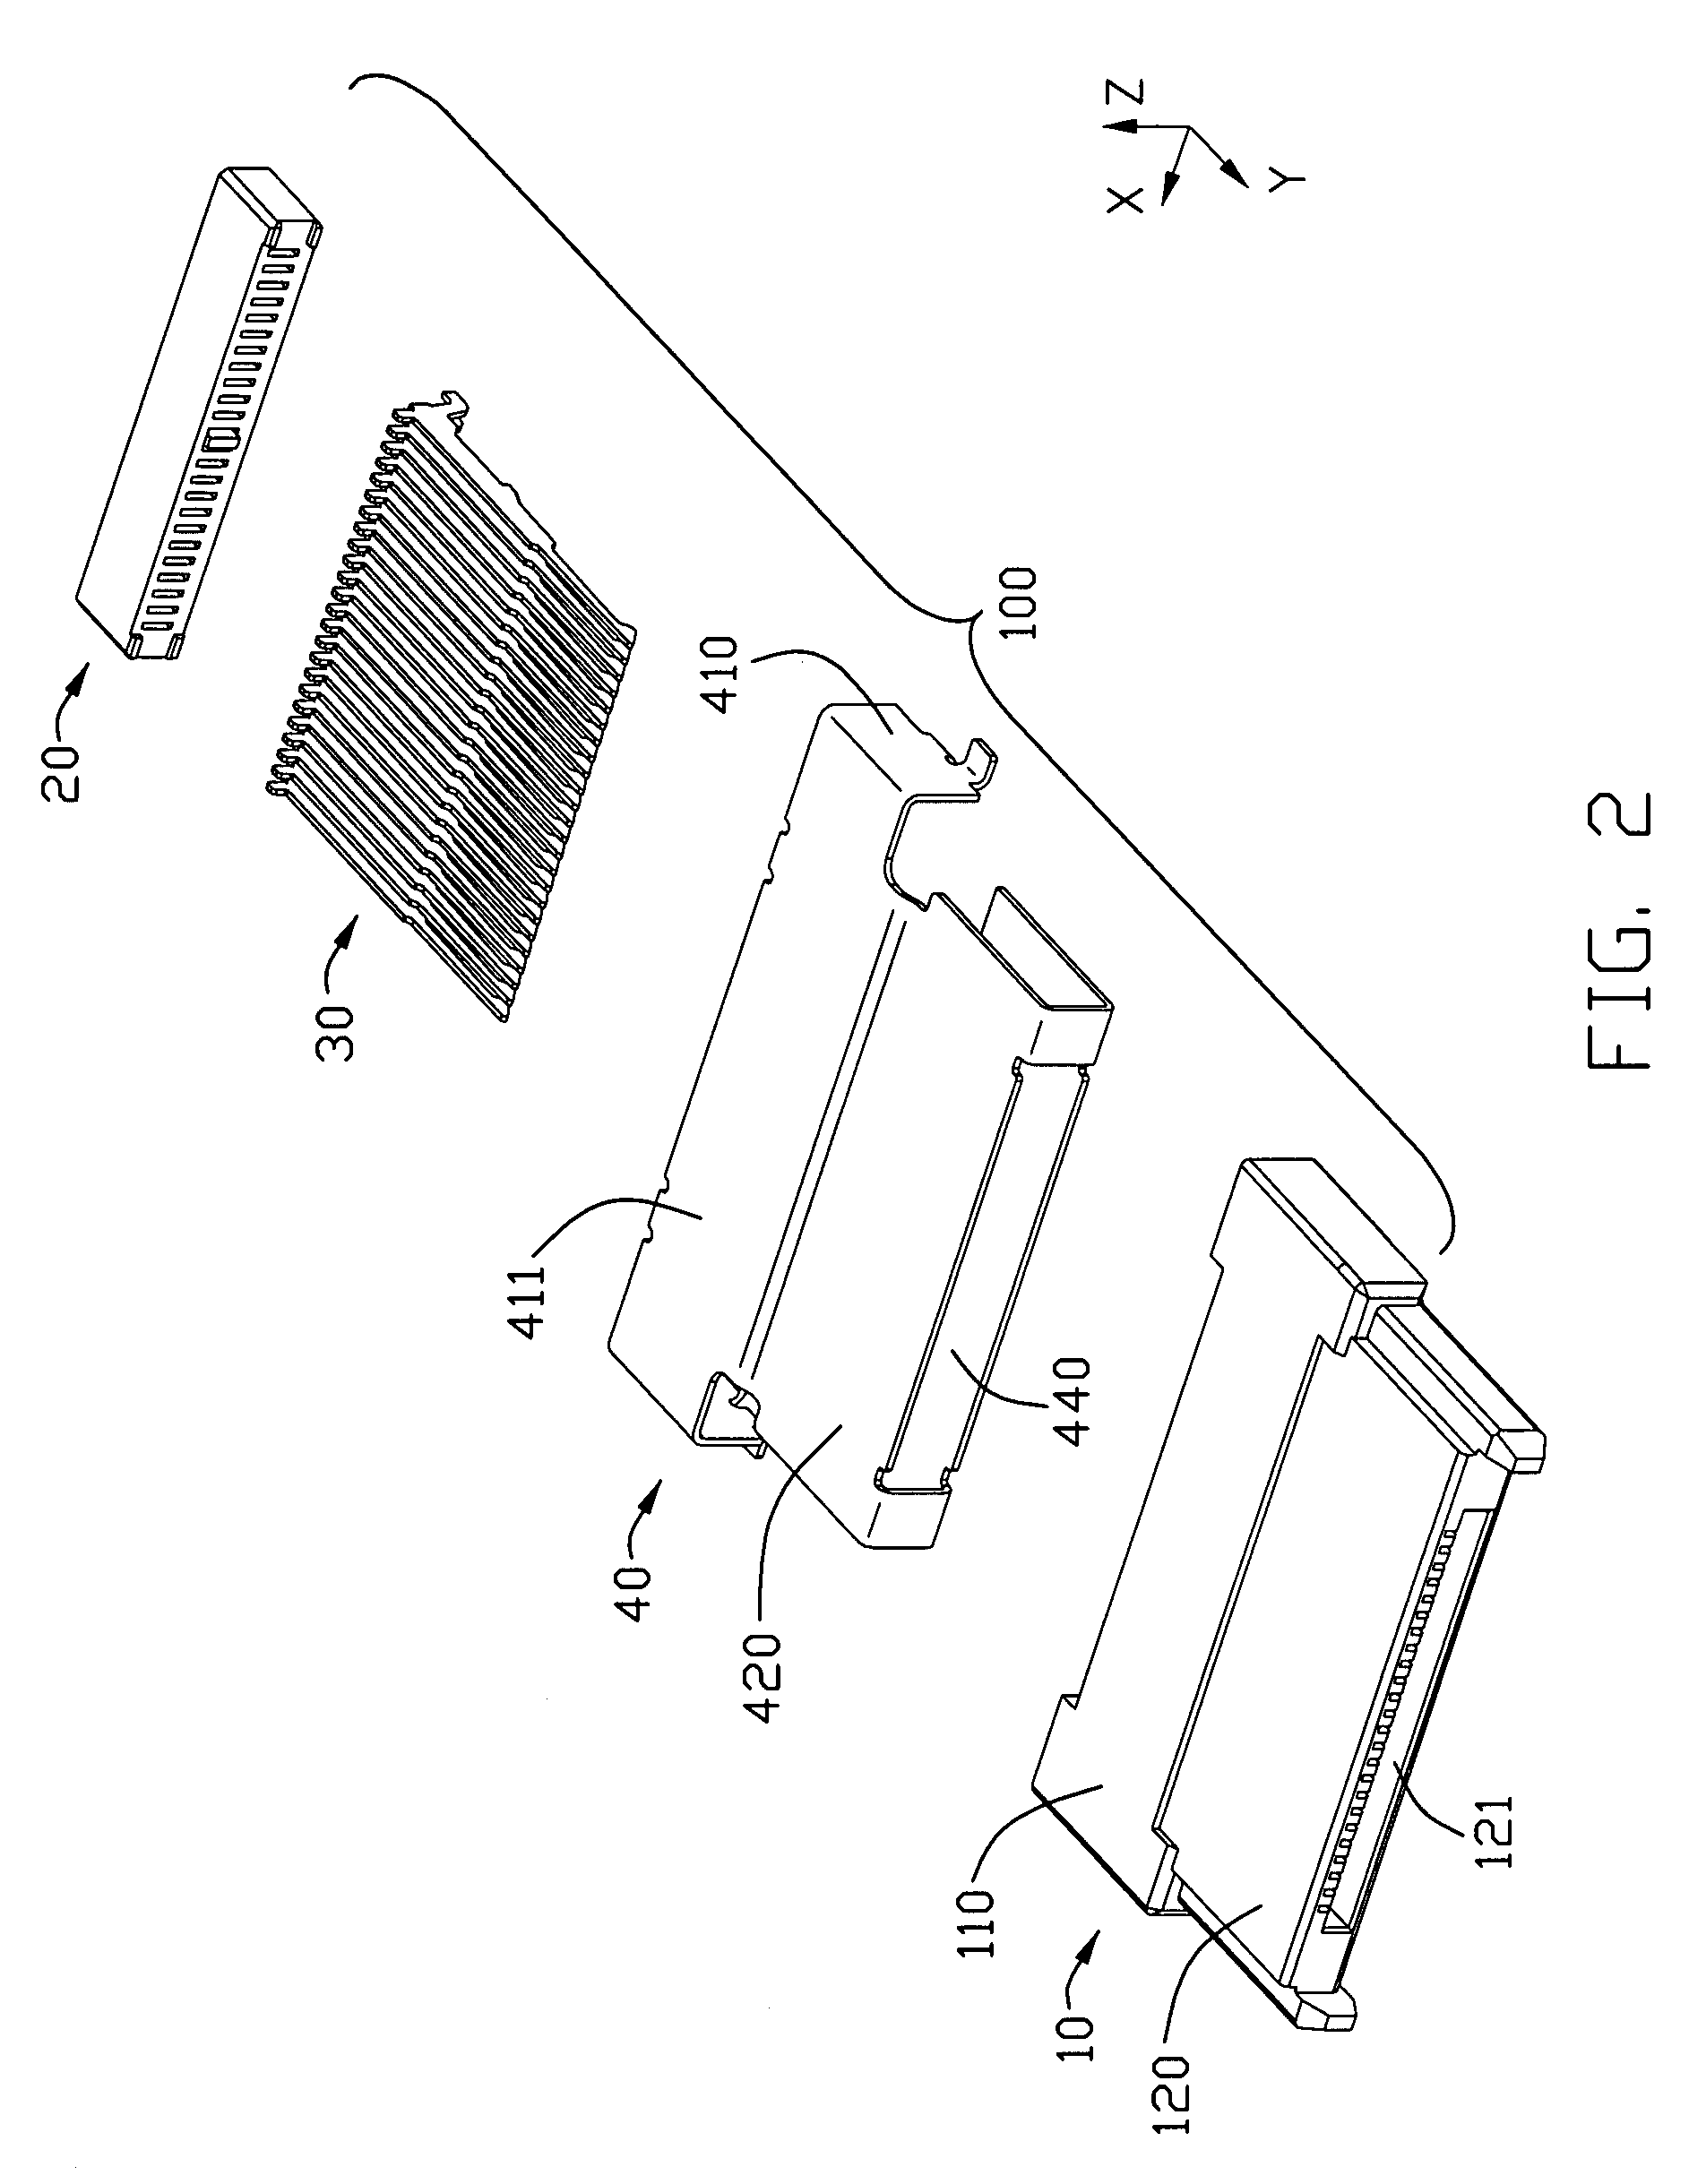 Electrical connector with improved housing